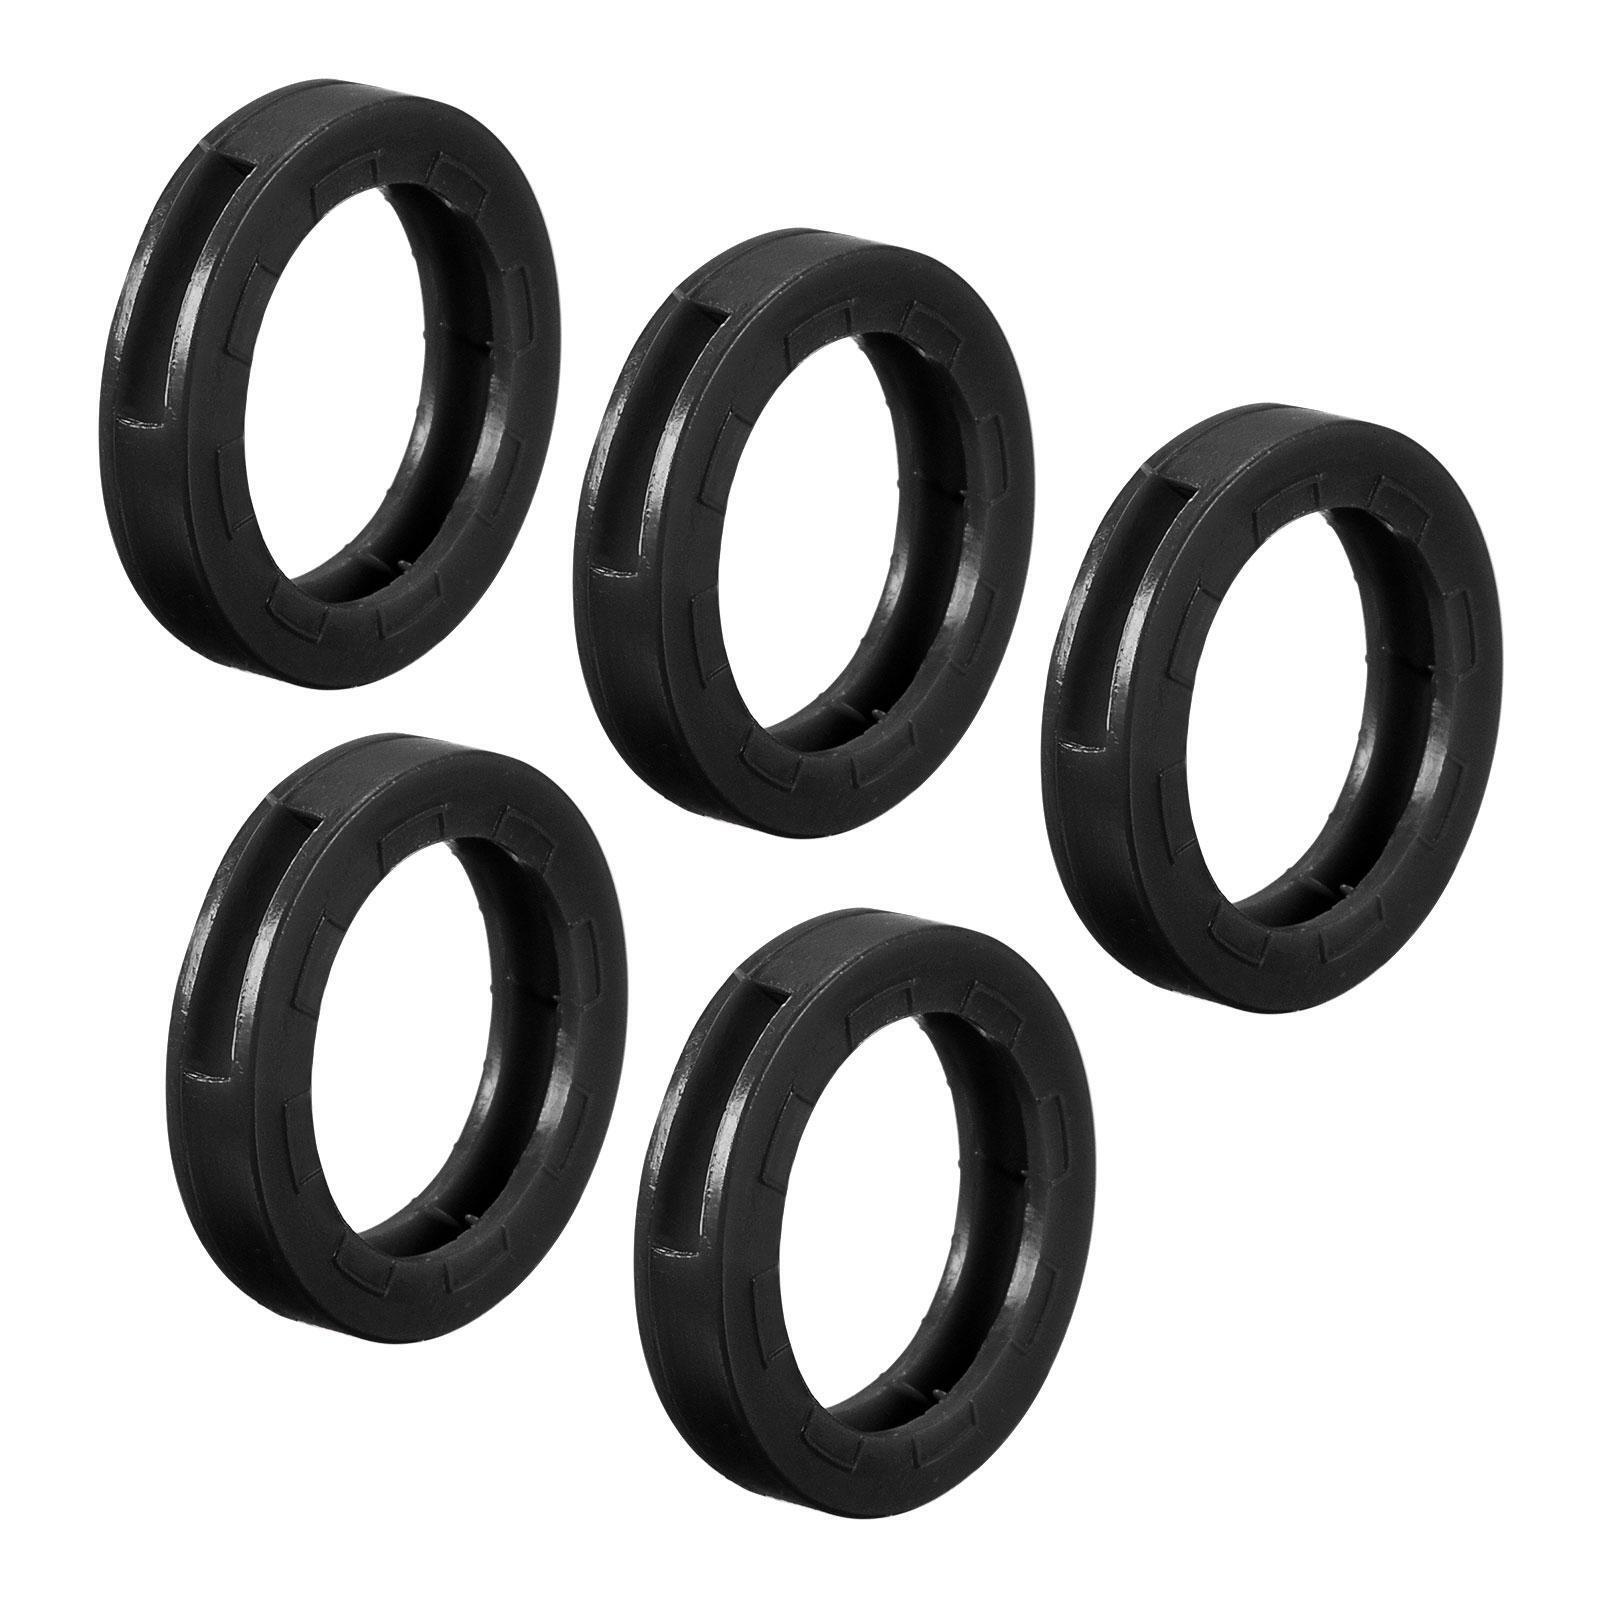 10pcs 24mm Key Cap Cover Rings Identifier Coding Tag Silicone Sleeve Black